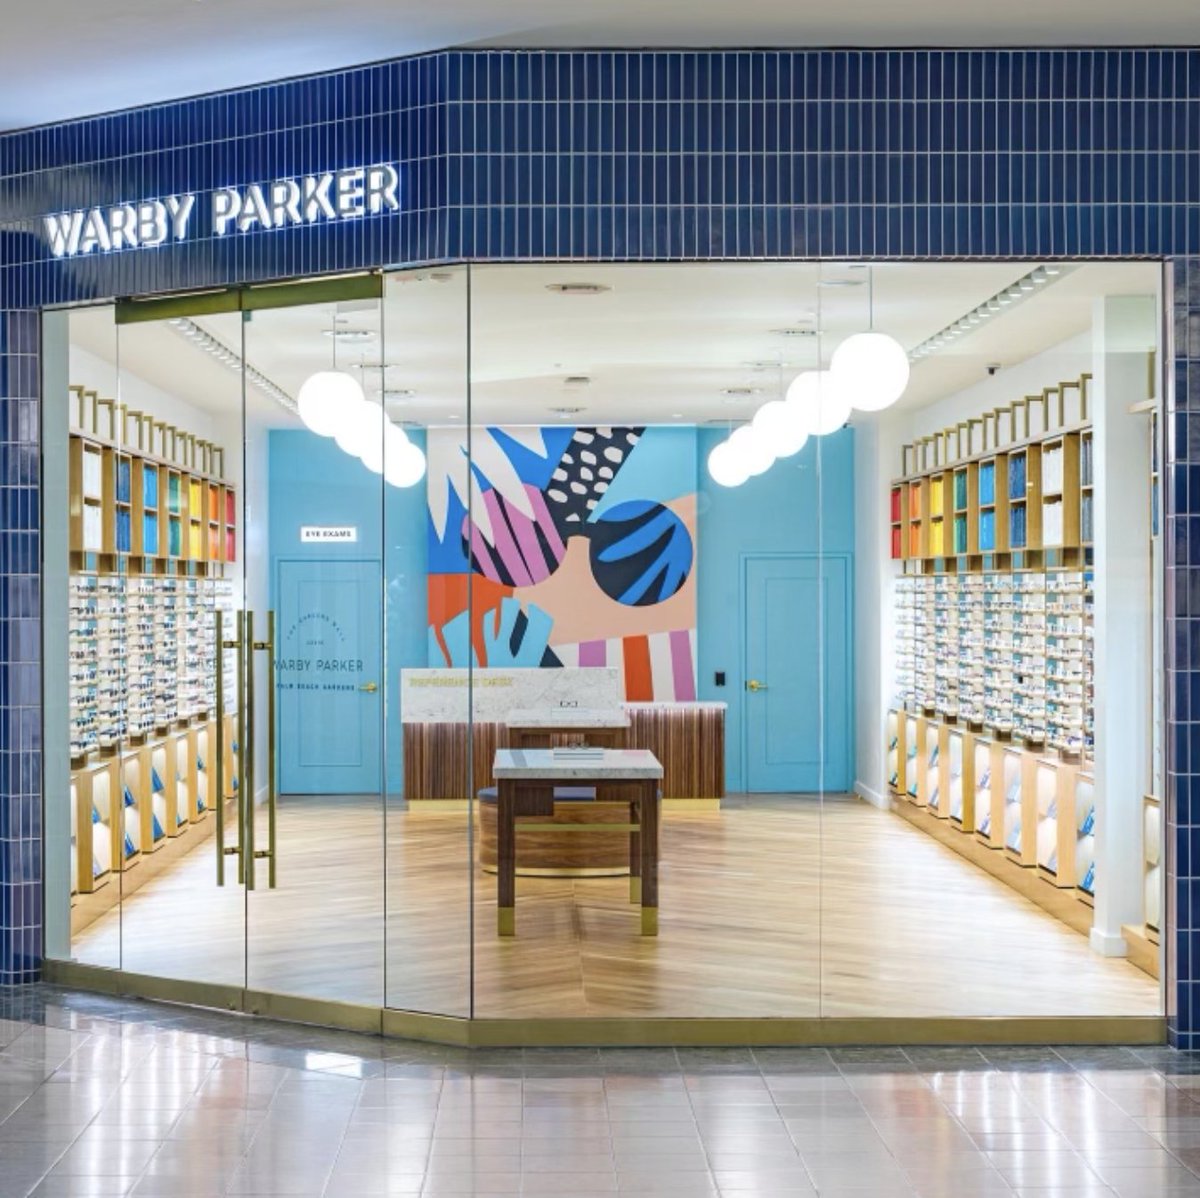 Warby Parker on X: "First up is our store in Palm Beach Gardens, FL at  @thegardensmall! As an opening weekend treat, we'll be giving away our Keys  Wallet Sunglasses pouch with every